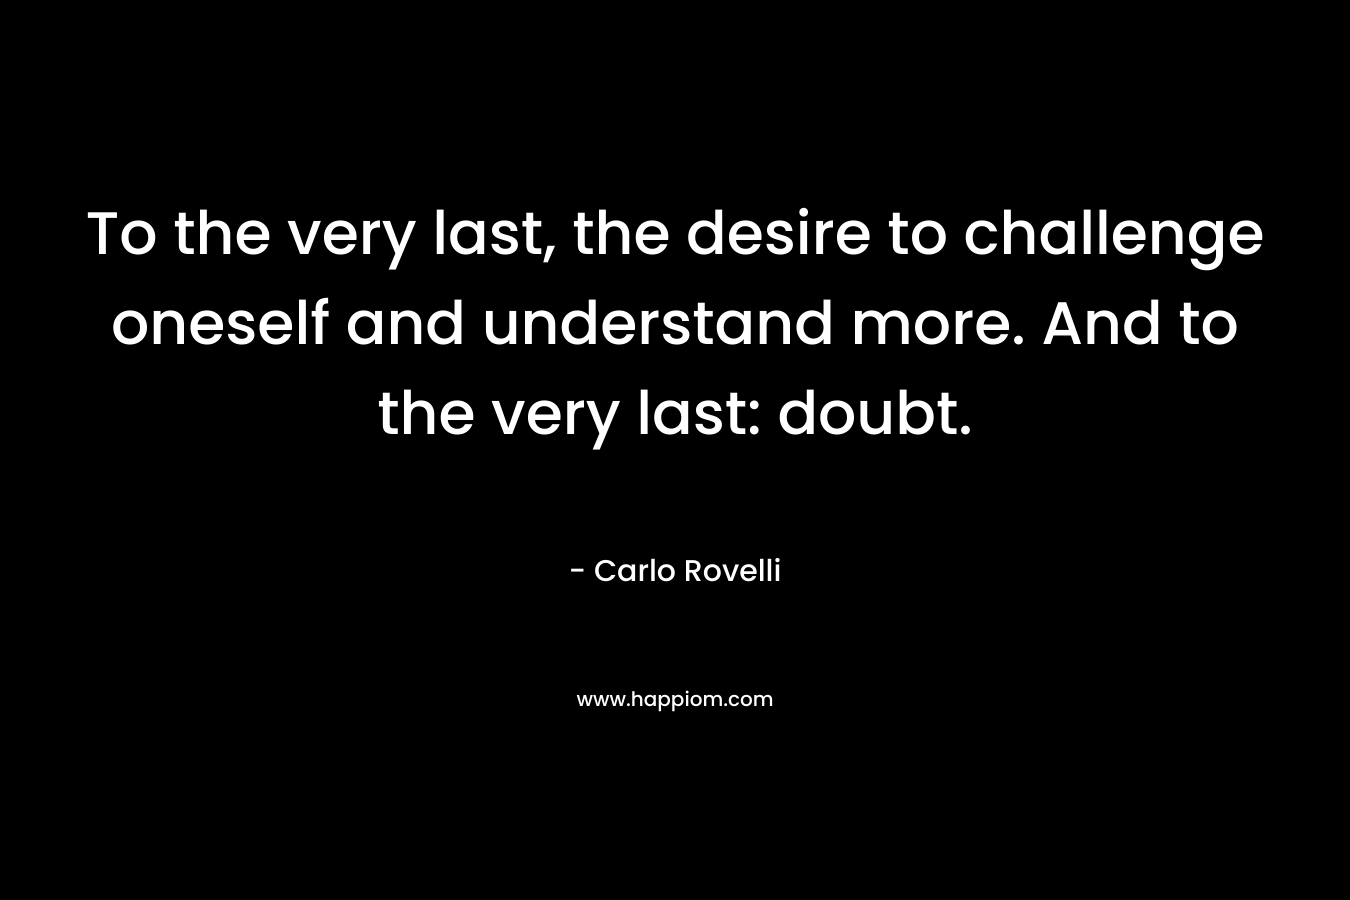 To the very last, the desire to challenge oneself and understand more. And to the very last: doubt. – Carlo Rovelli